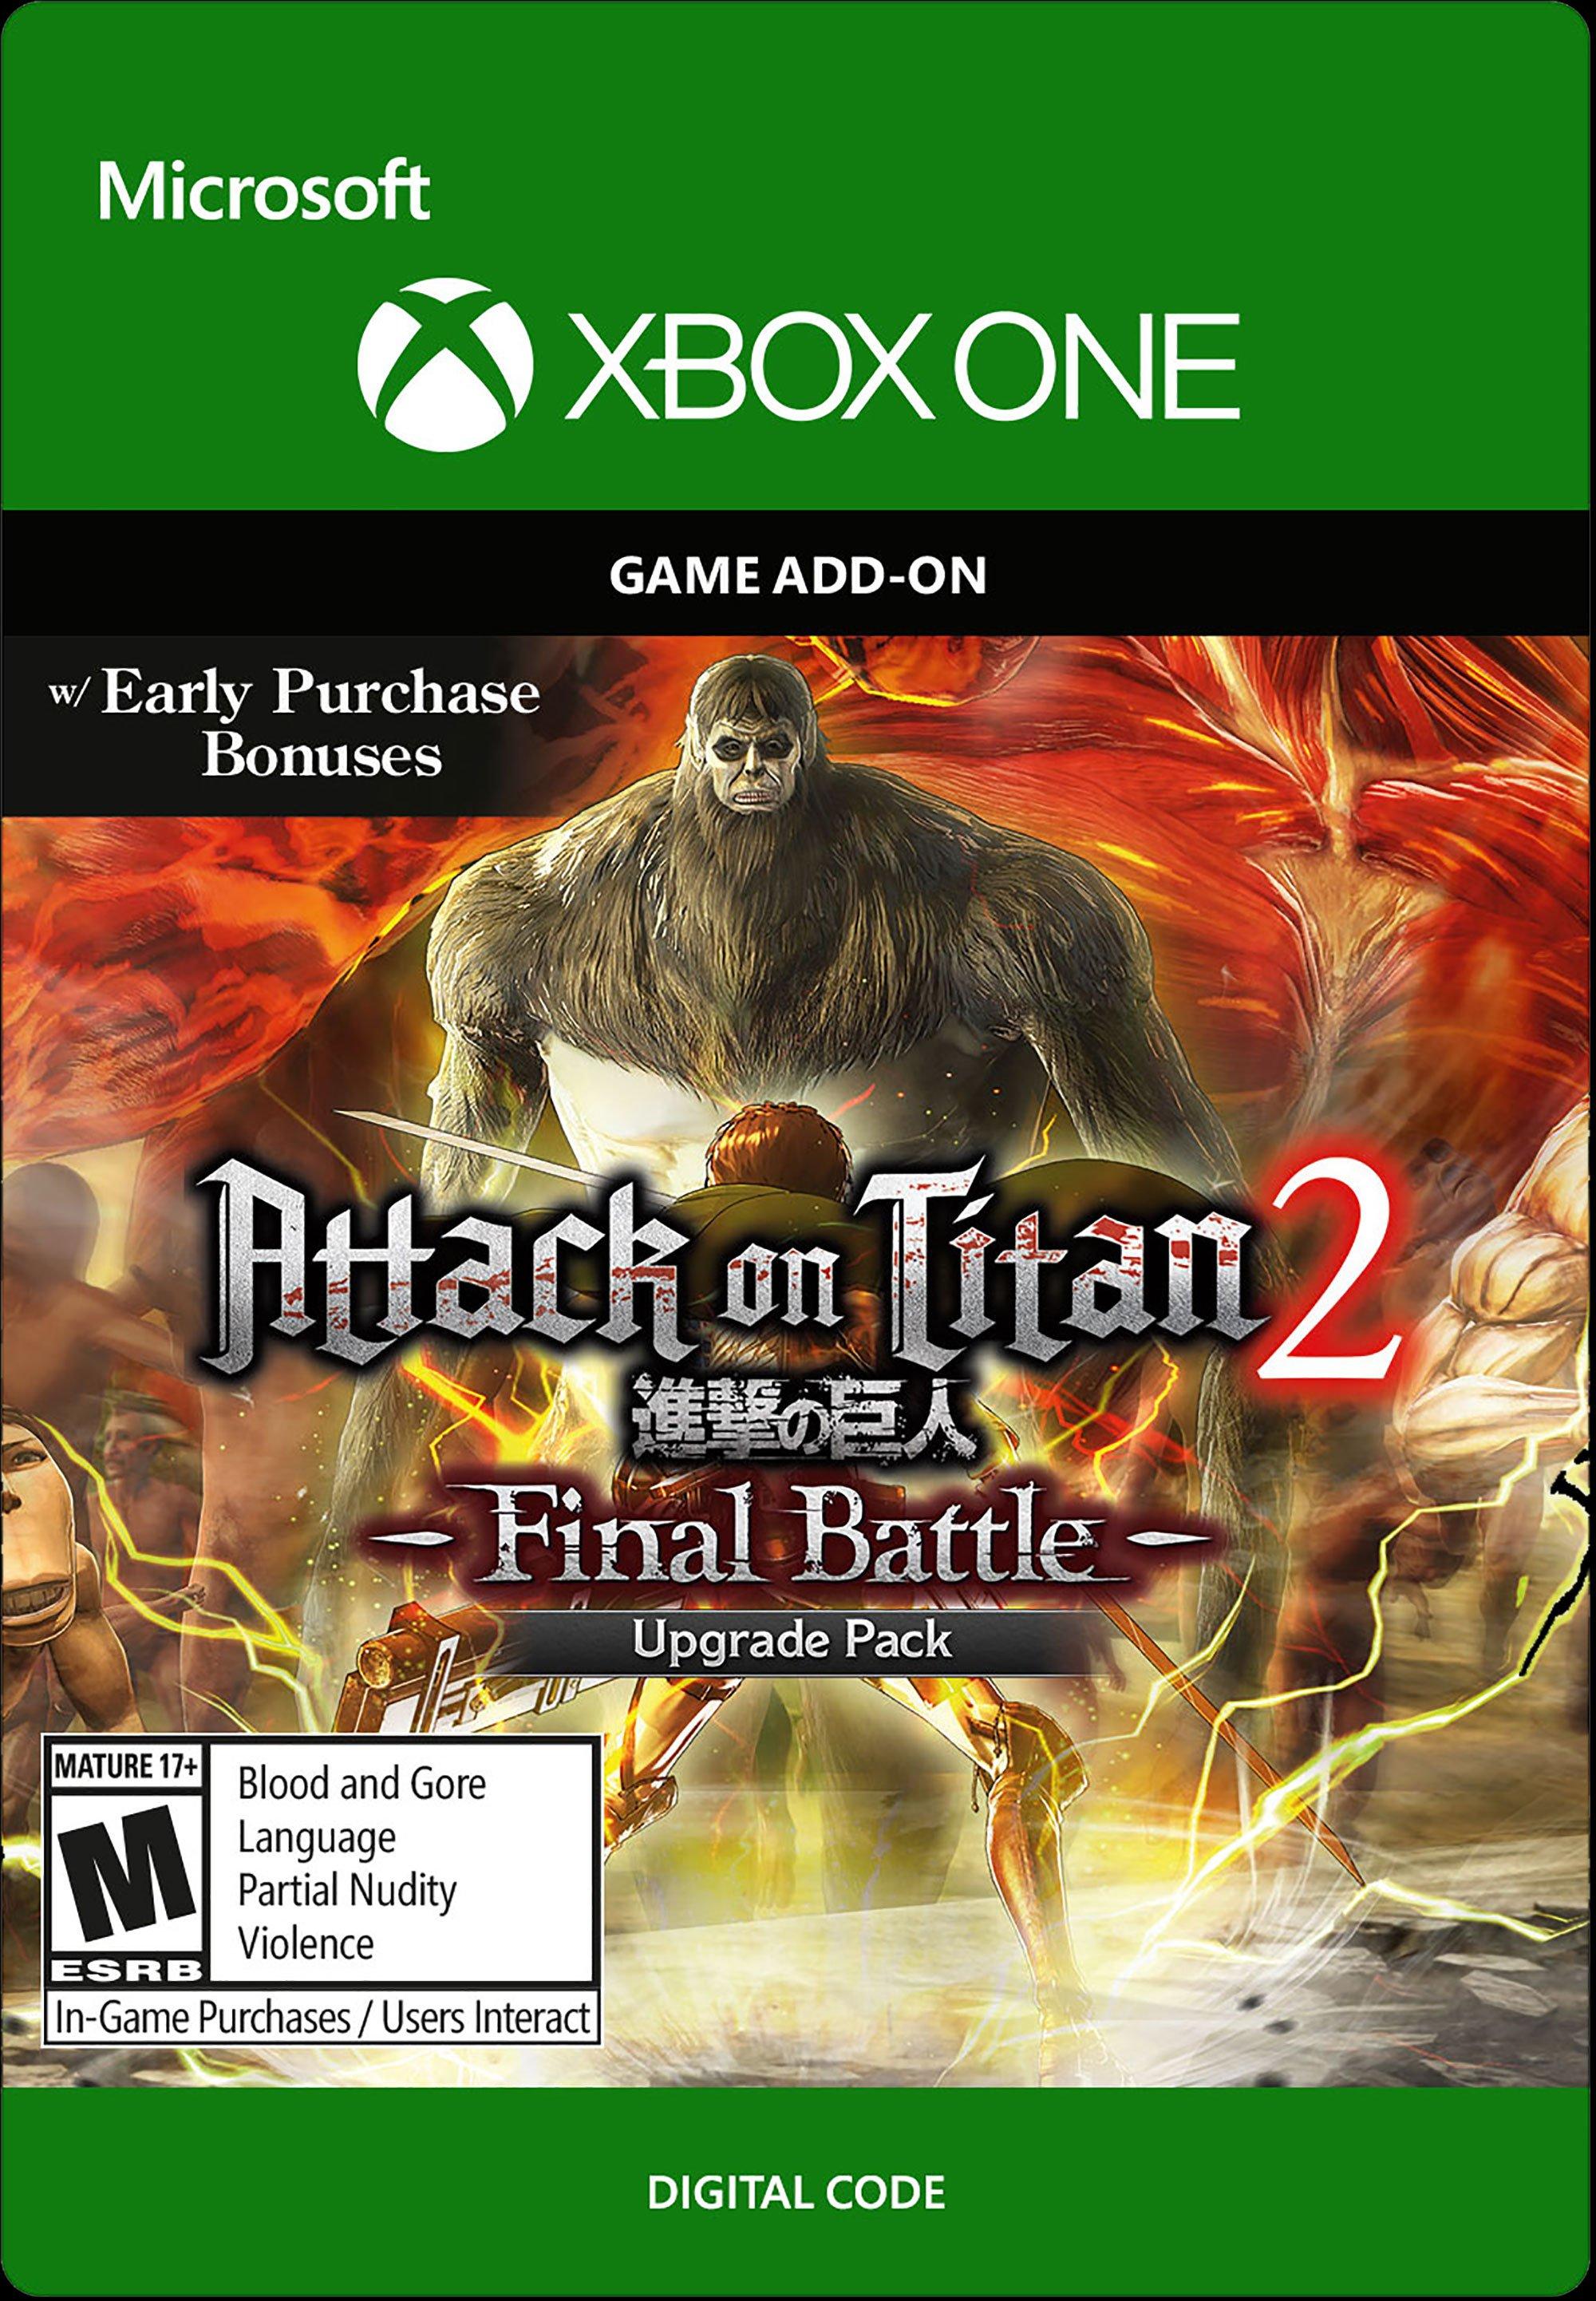 Attack on Titan 2: Final Battle Upgrade Pack DLC - Xbox One